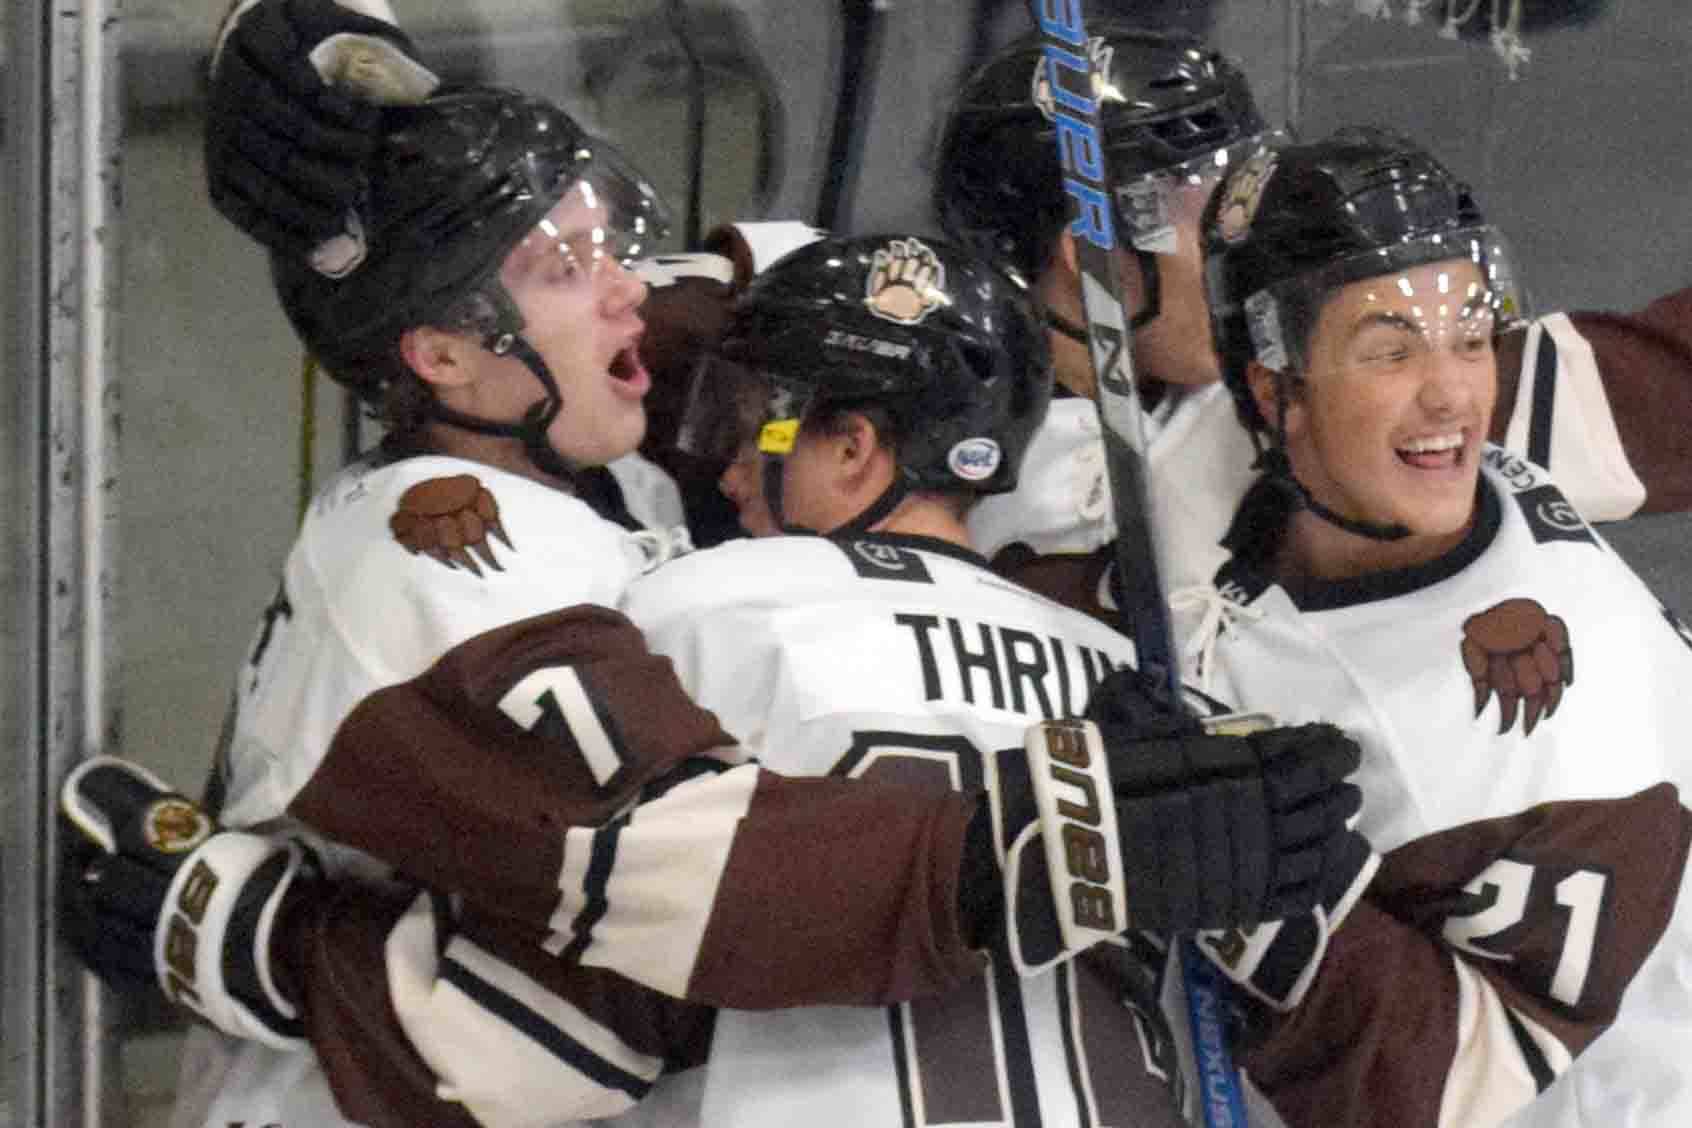 The Kenai River Brown Bears celebrate the first-period goal of Logan Ritchie (far left) on Thursday, Nov. 21, 2019, at the Soldotna Regional Sports Complex in Soldotna, Alaska. (Photo by Jeff Helminiak/Peninsula Clarion)